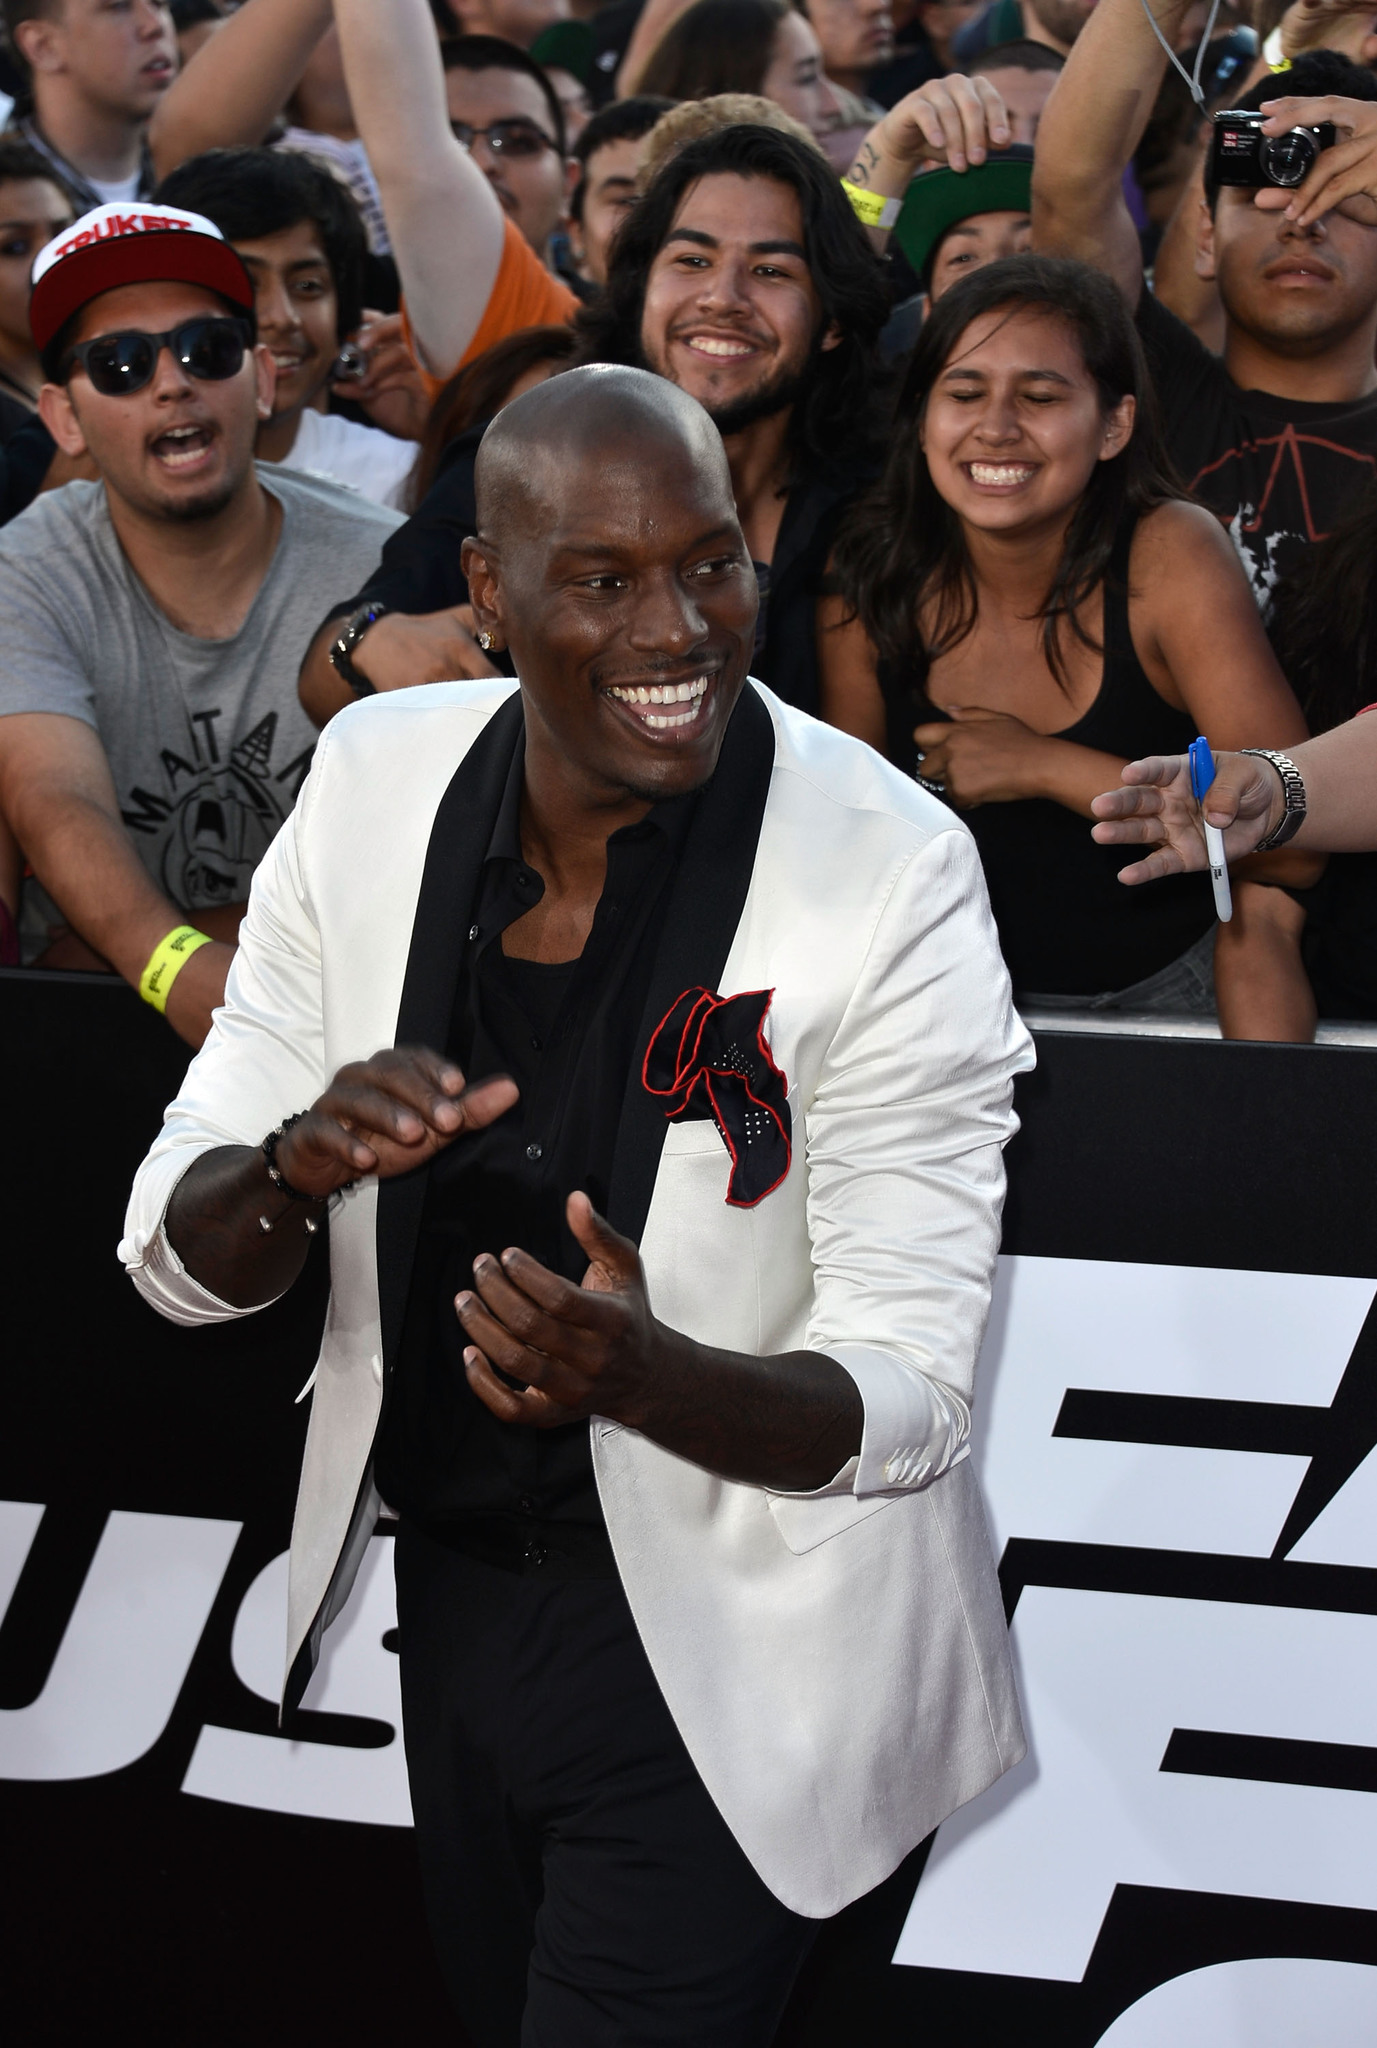 Tyrese Gibson at event of Greiti ir isiute 6 (2013)